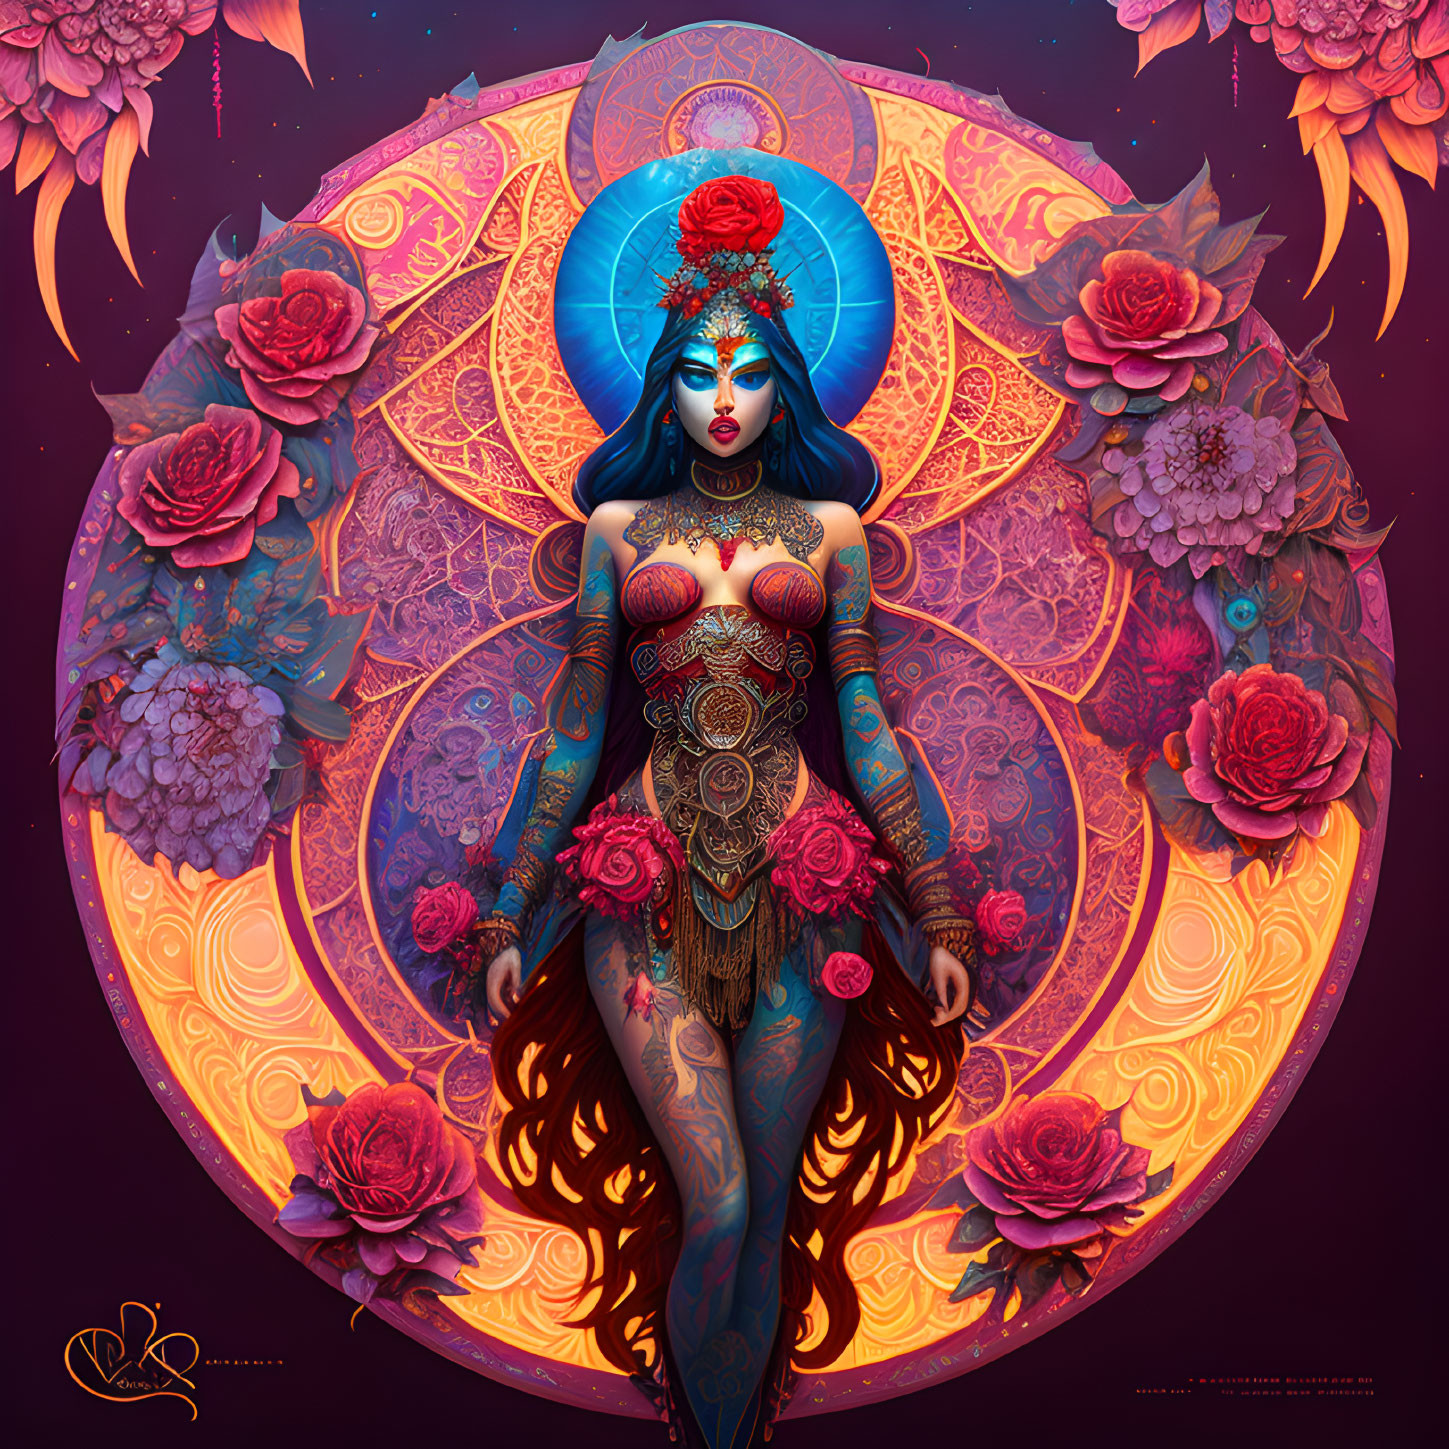 Stylized blue-skinned woman with ornate tattoos and red floral headpiece on mandala background